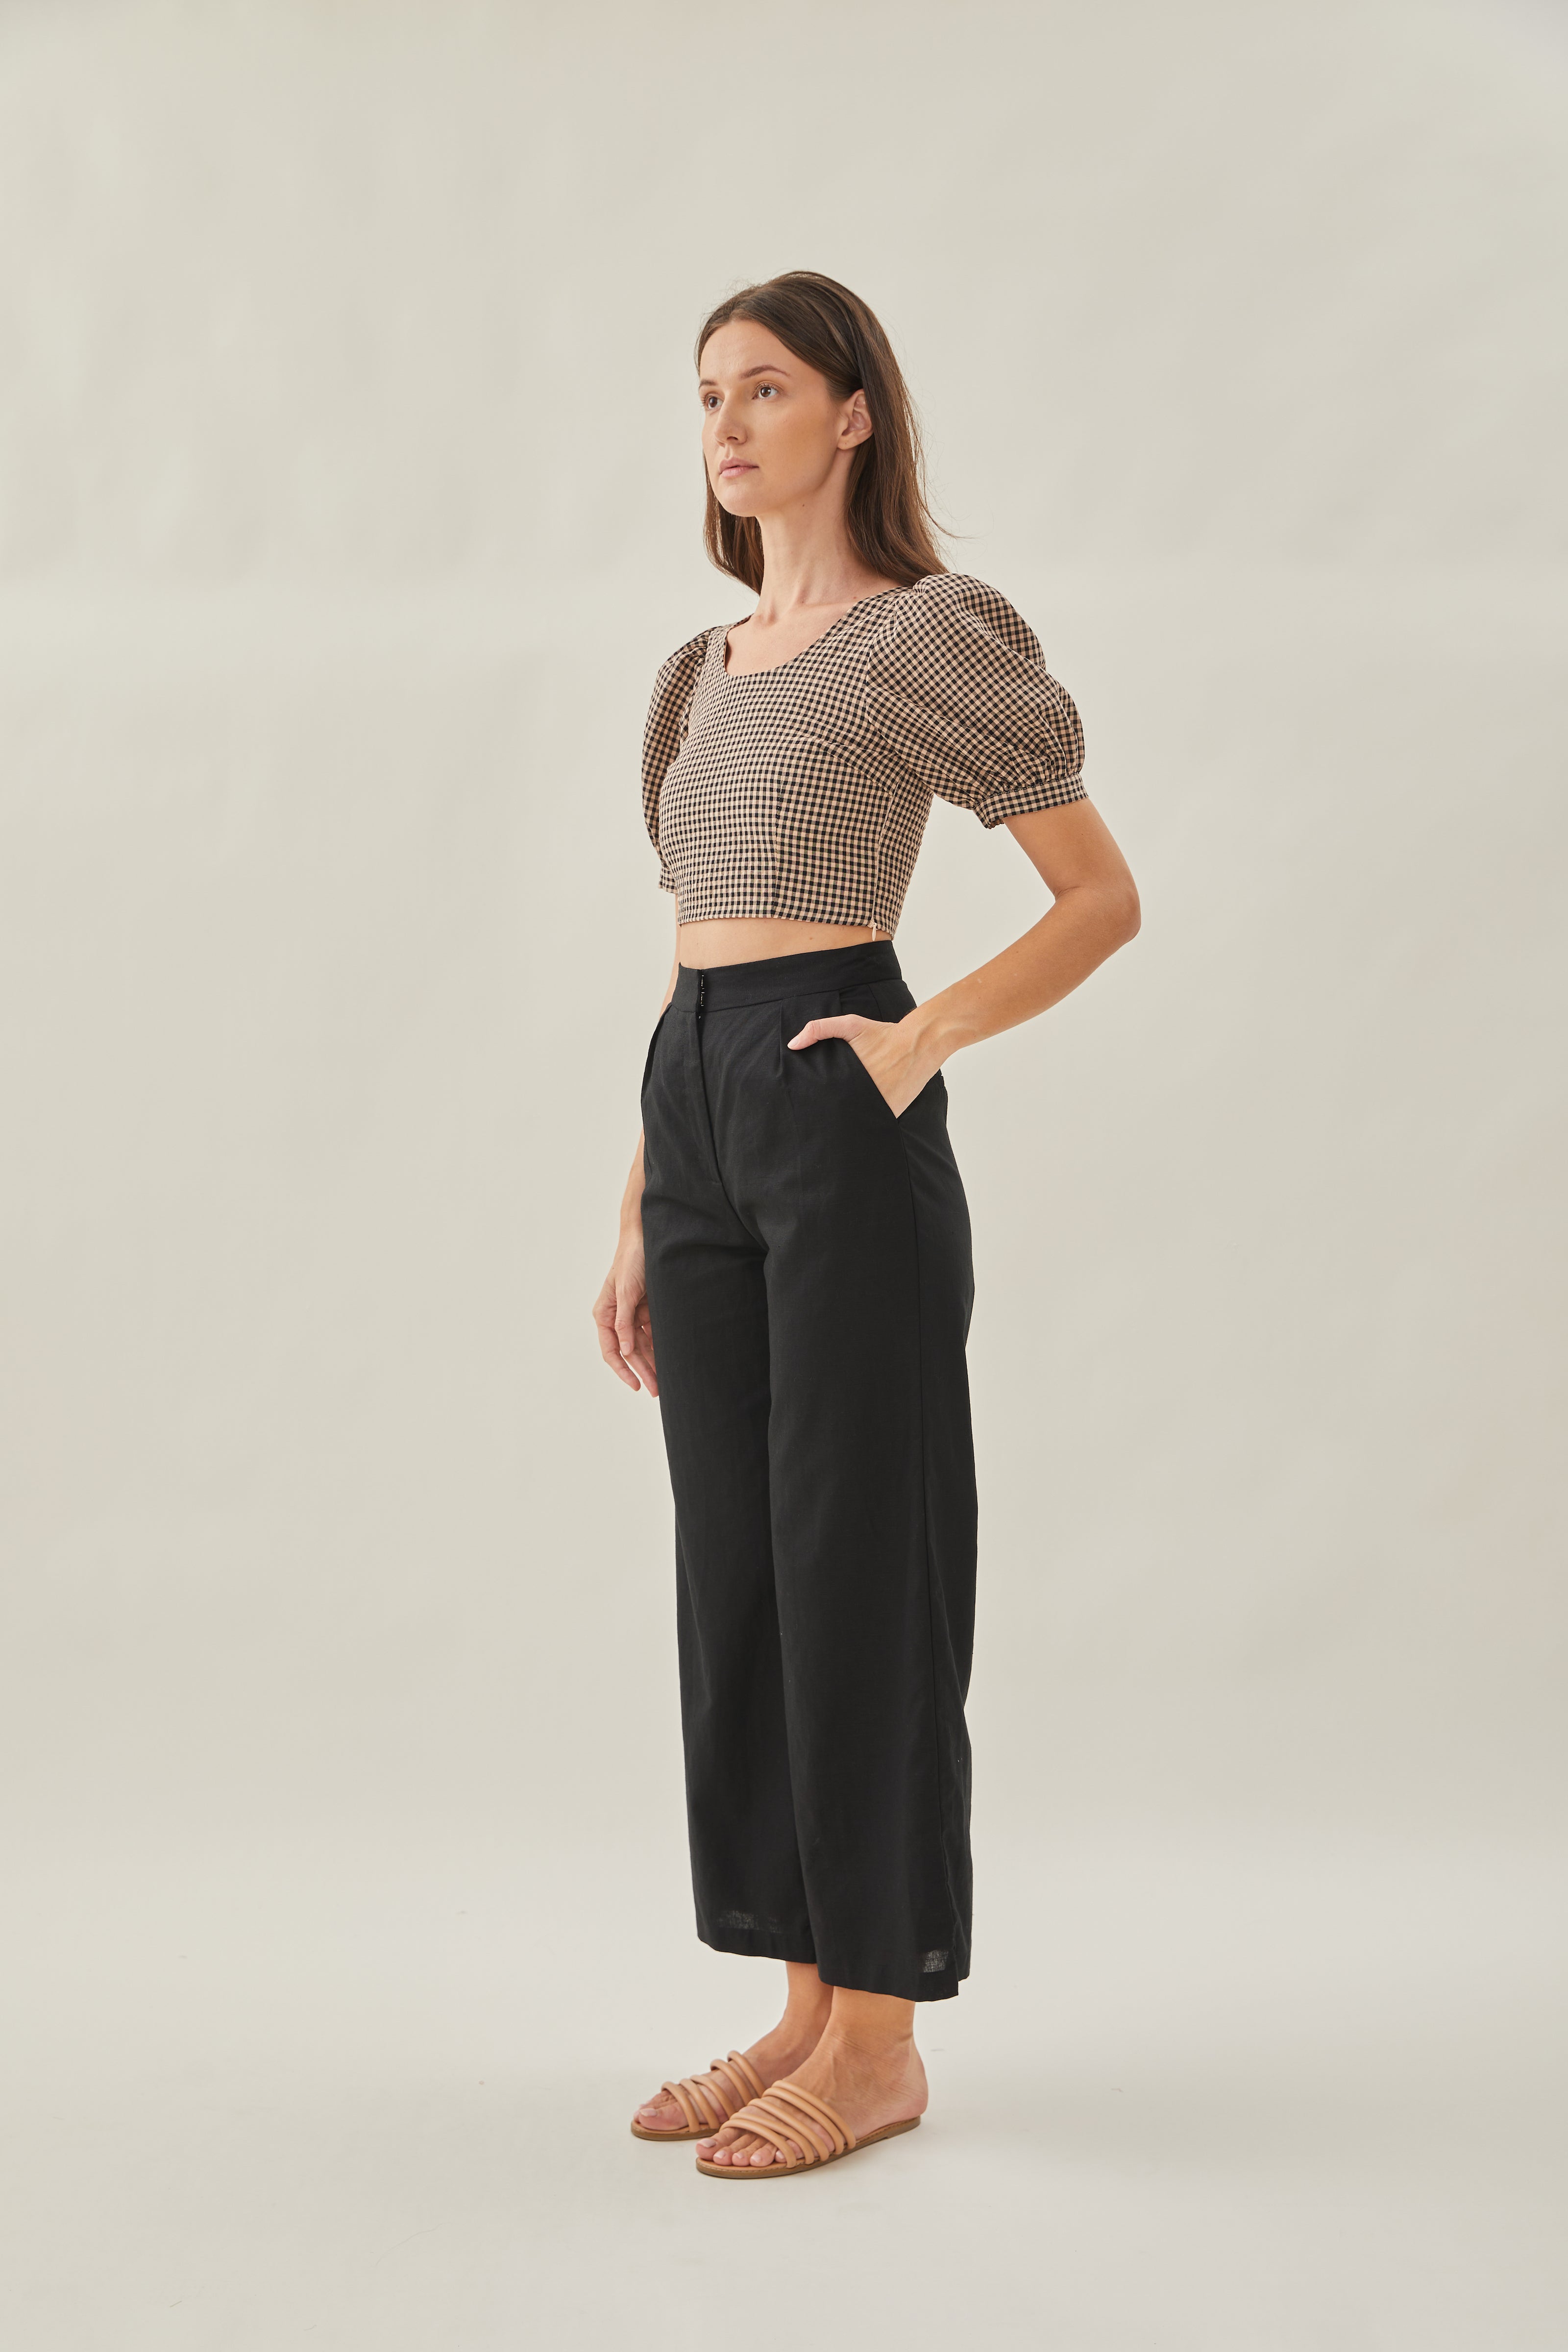 Cropped Puffed Sleeved Top in Fall